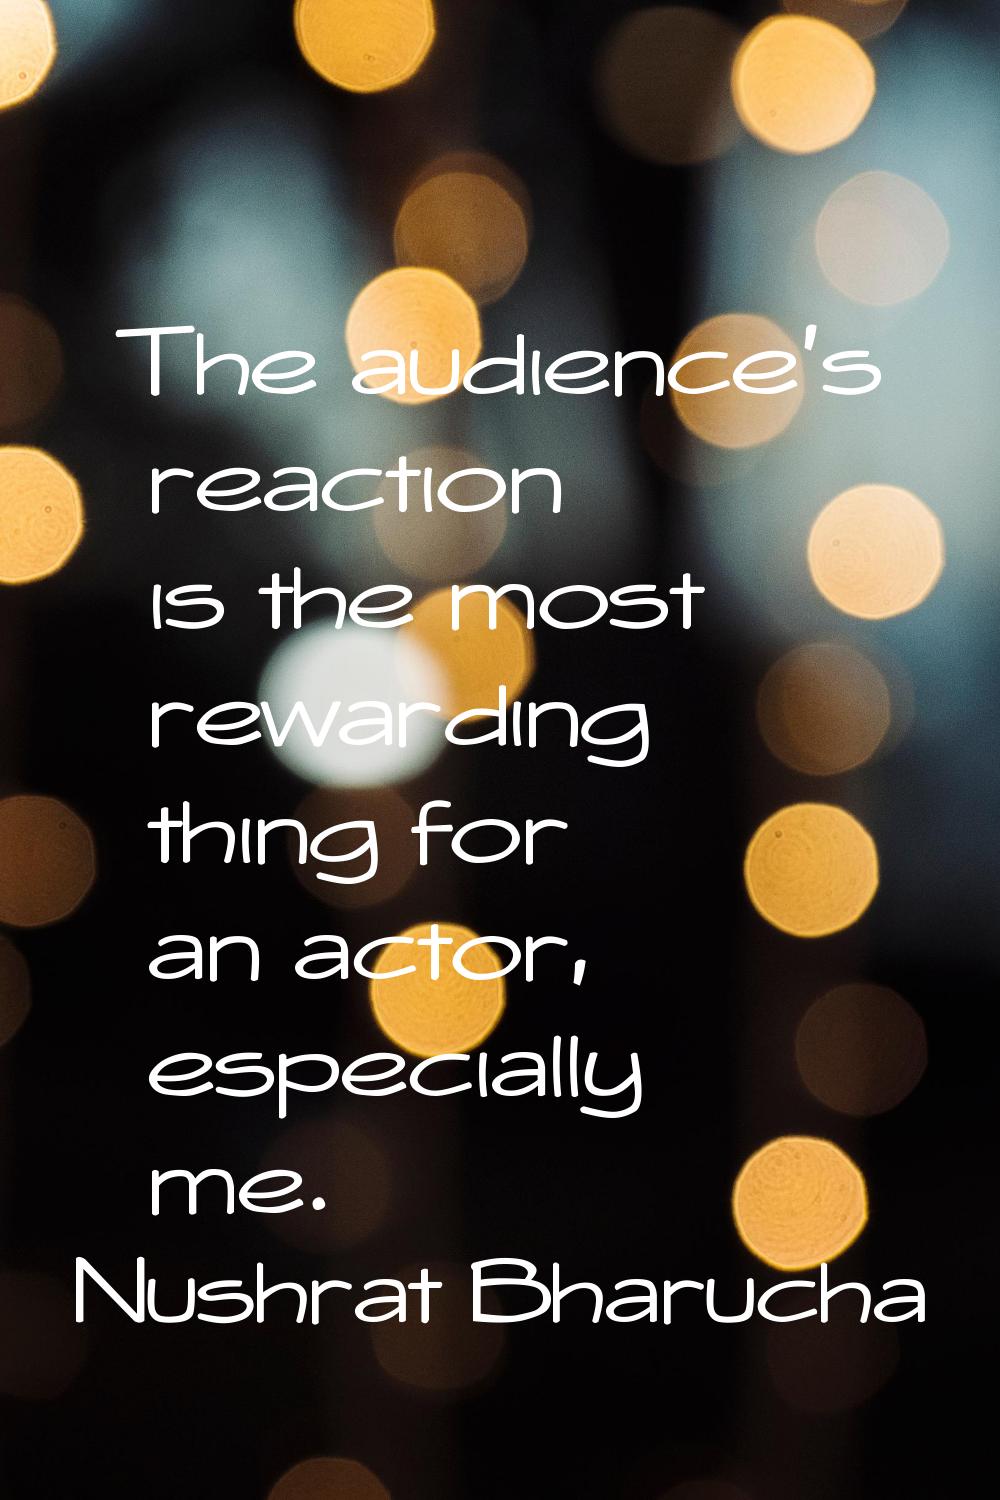 The audience's reaction is the most rewarding thing for an actor, especially me.